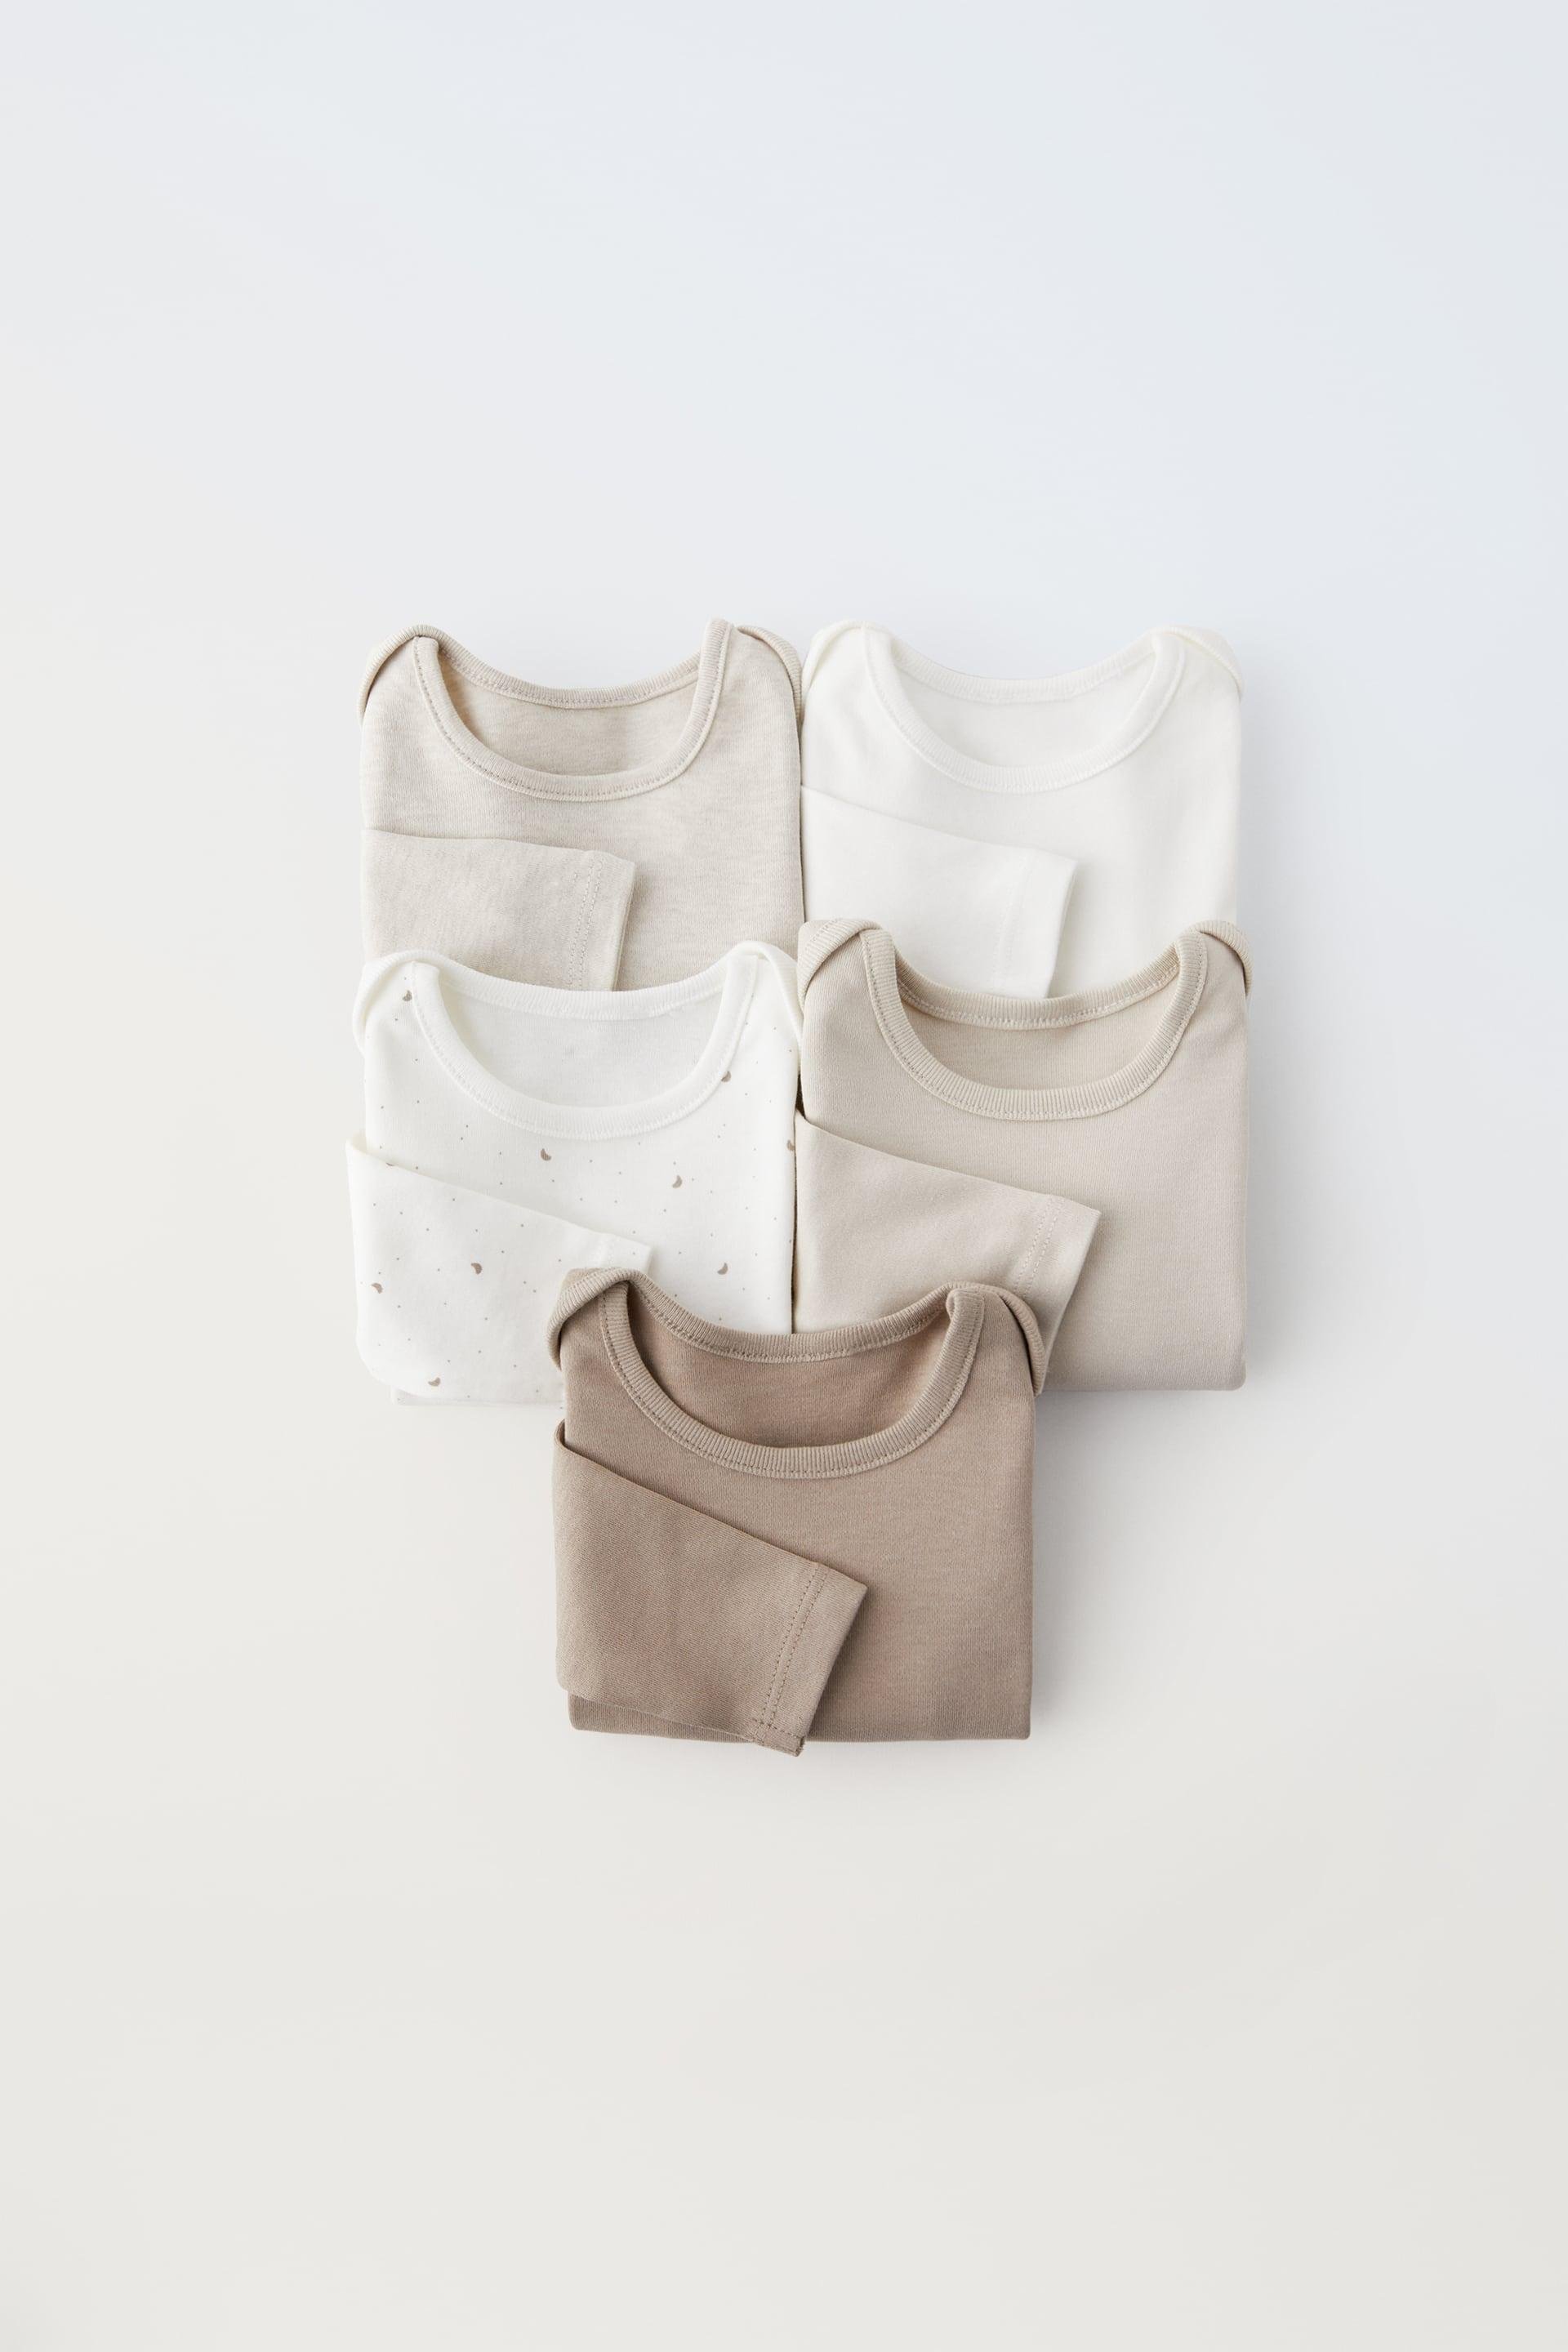 FIVE-PACK OF TOAST COLORED BODYSUITS by ZARA